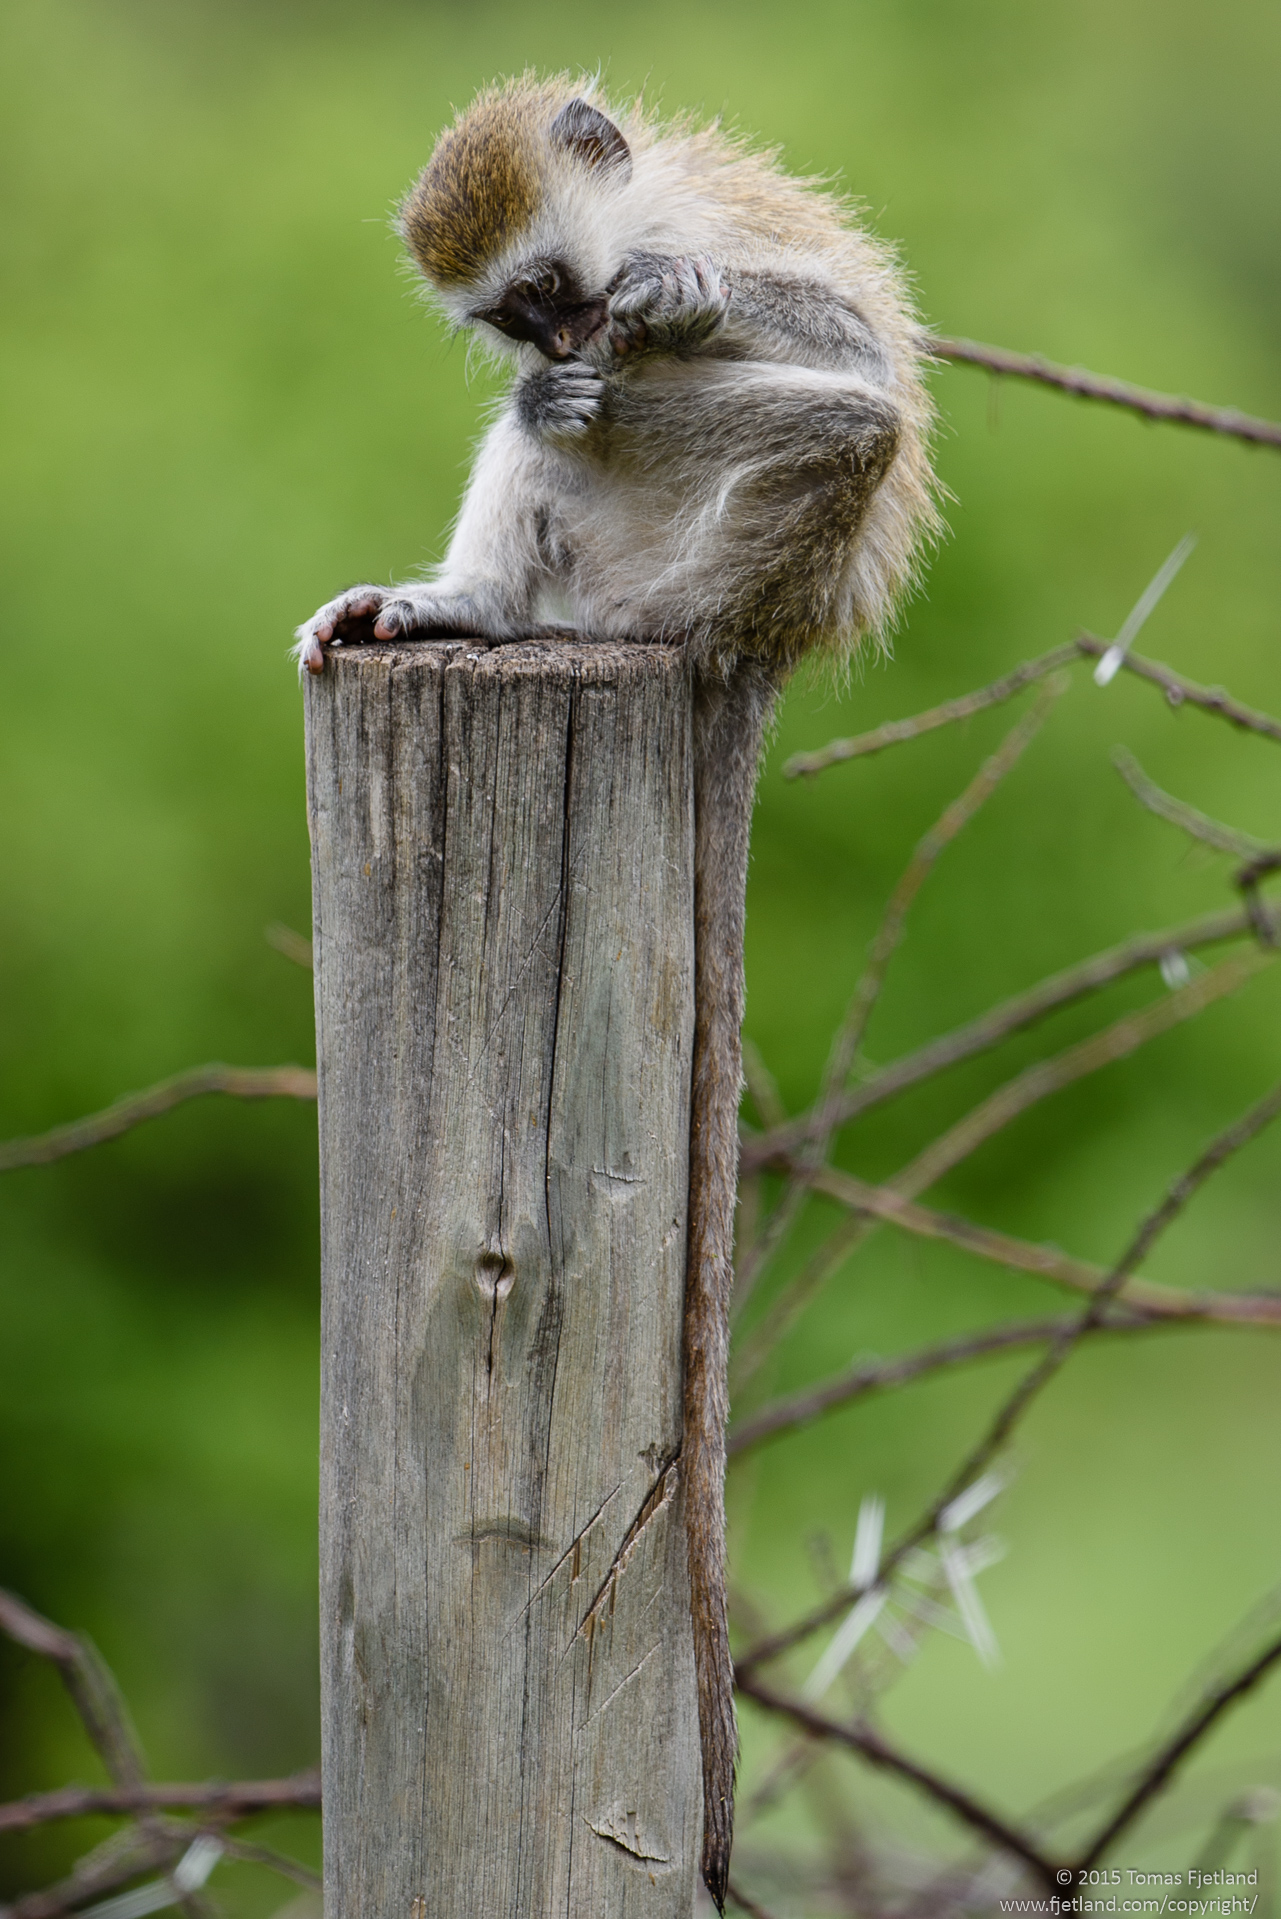 This young Vervet monkey decided to take a break from watching us for anything to steal so he could do some pedicure